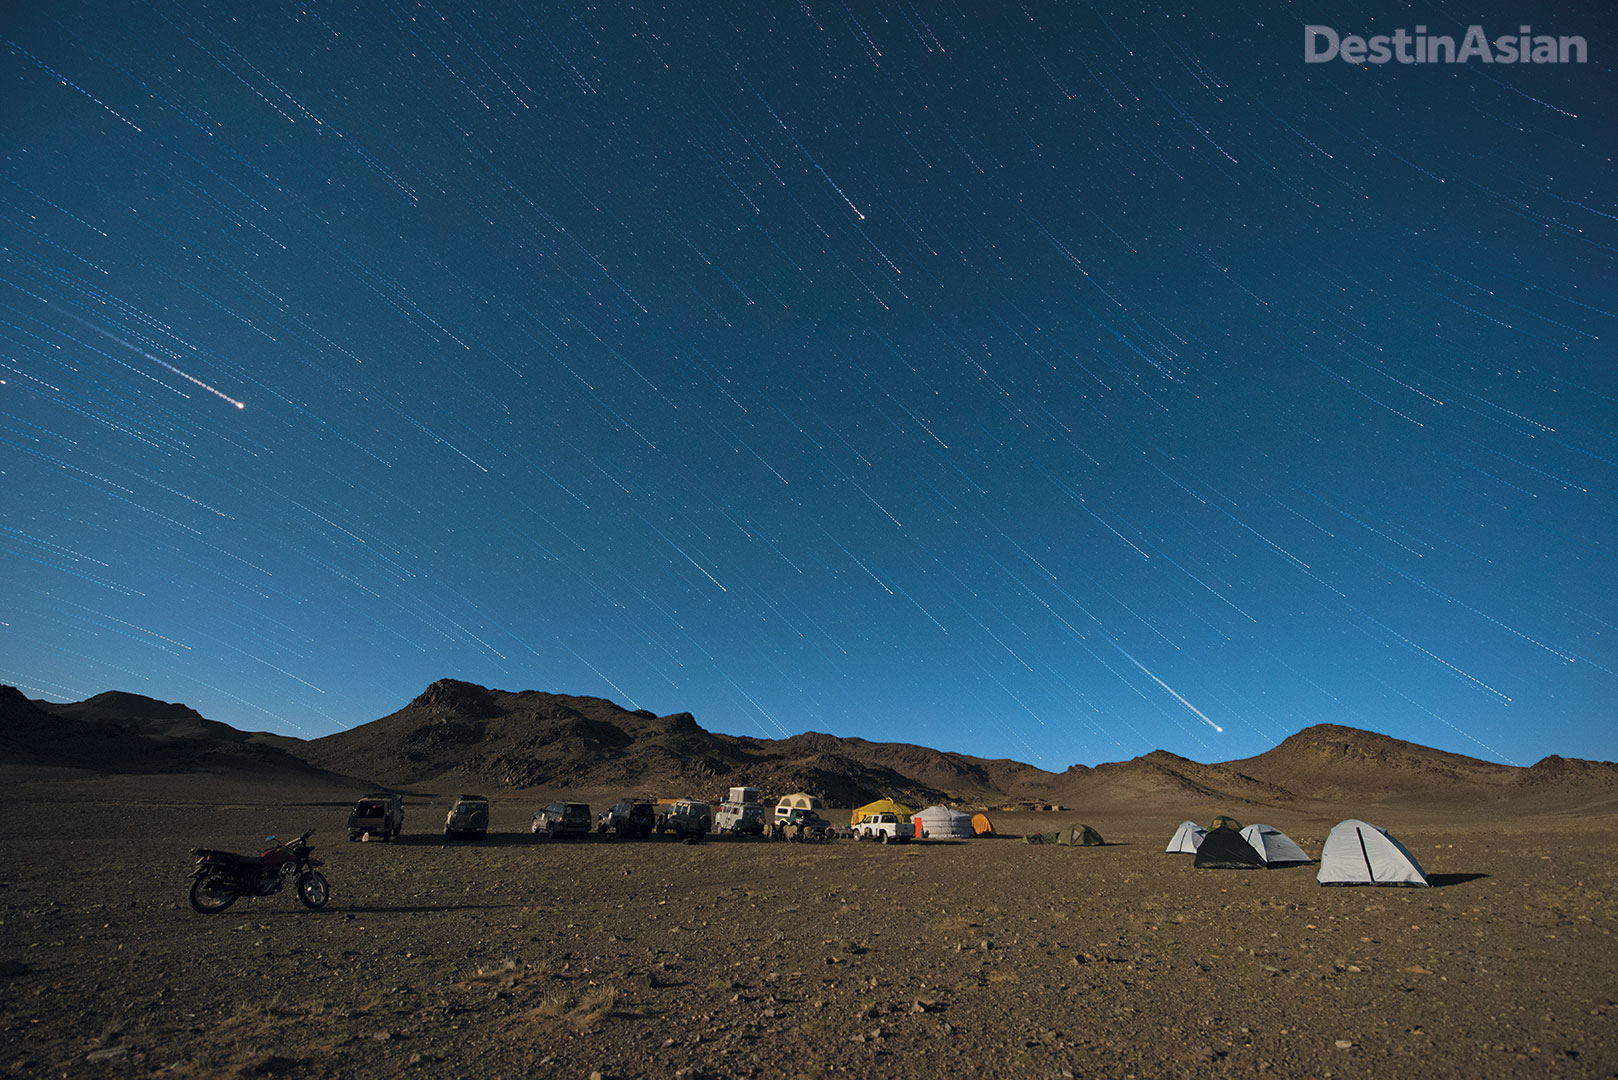 Camping under the stars deep into the wilderness of Mongolia's southernmost province, Ömnögovi. 